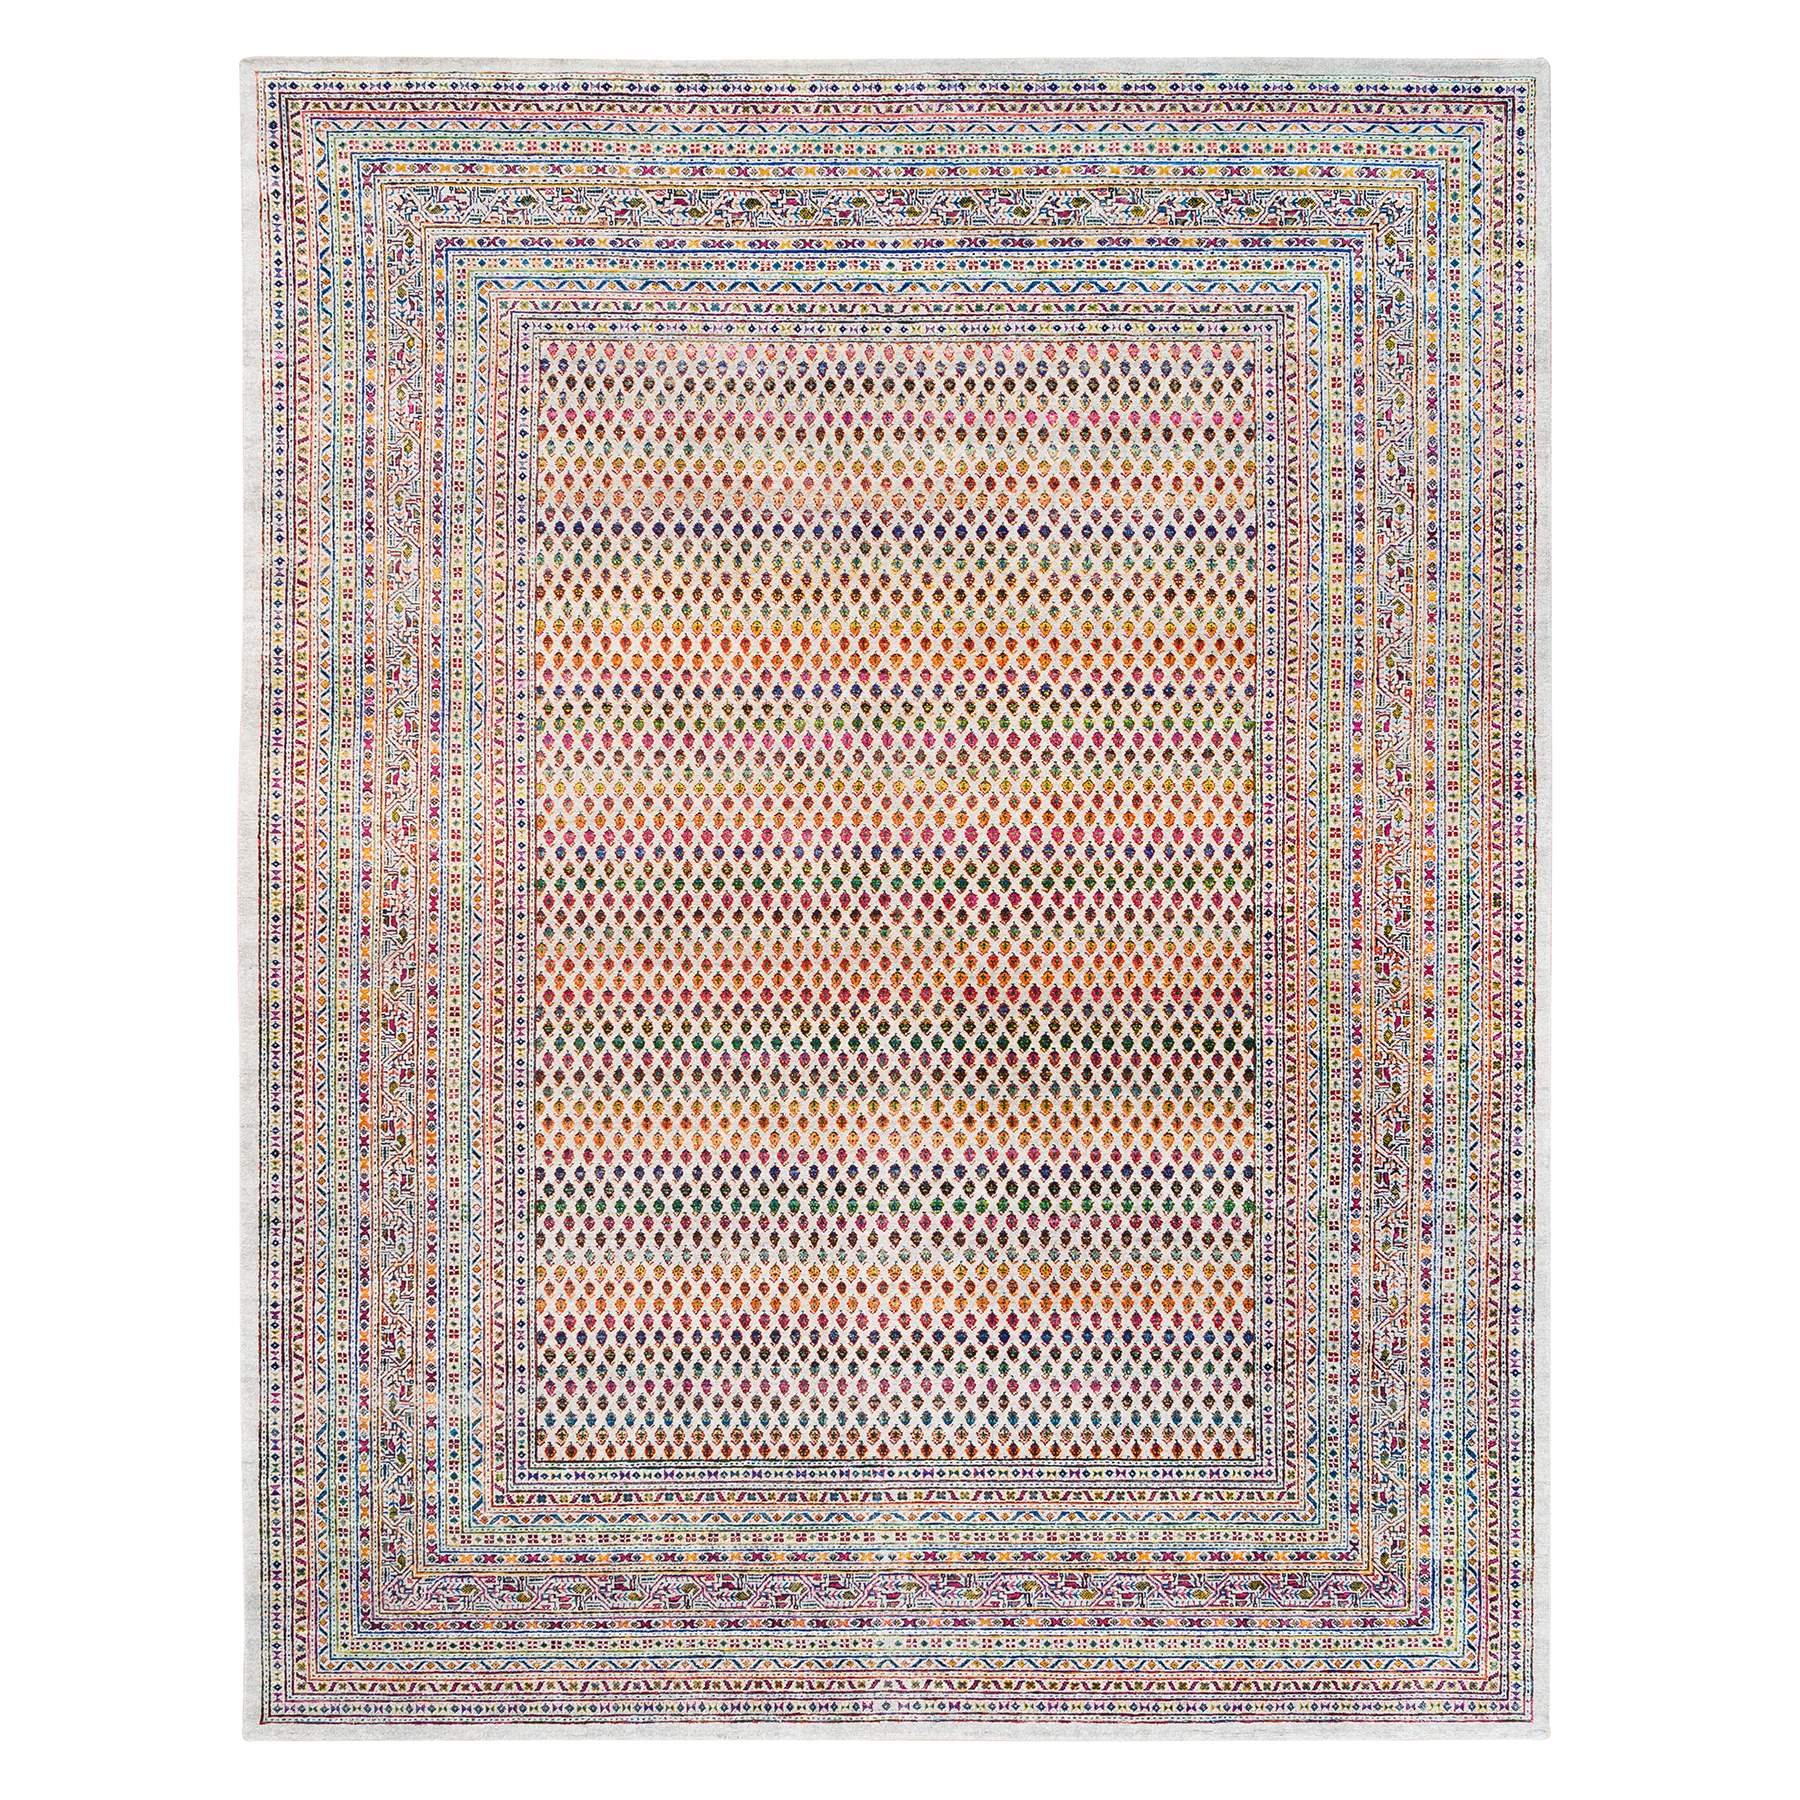 8'10"x12' Wool And Sari Silk Colorful Sarouk Mir Inspired with Repetitive Boteh Design Hand Woven Oriental Rug 